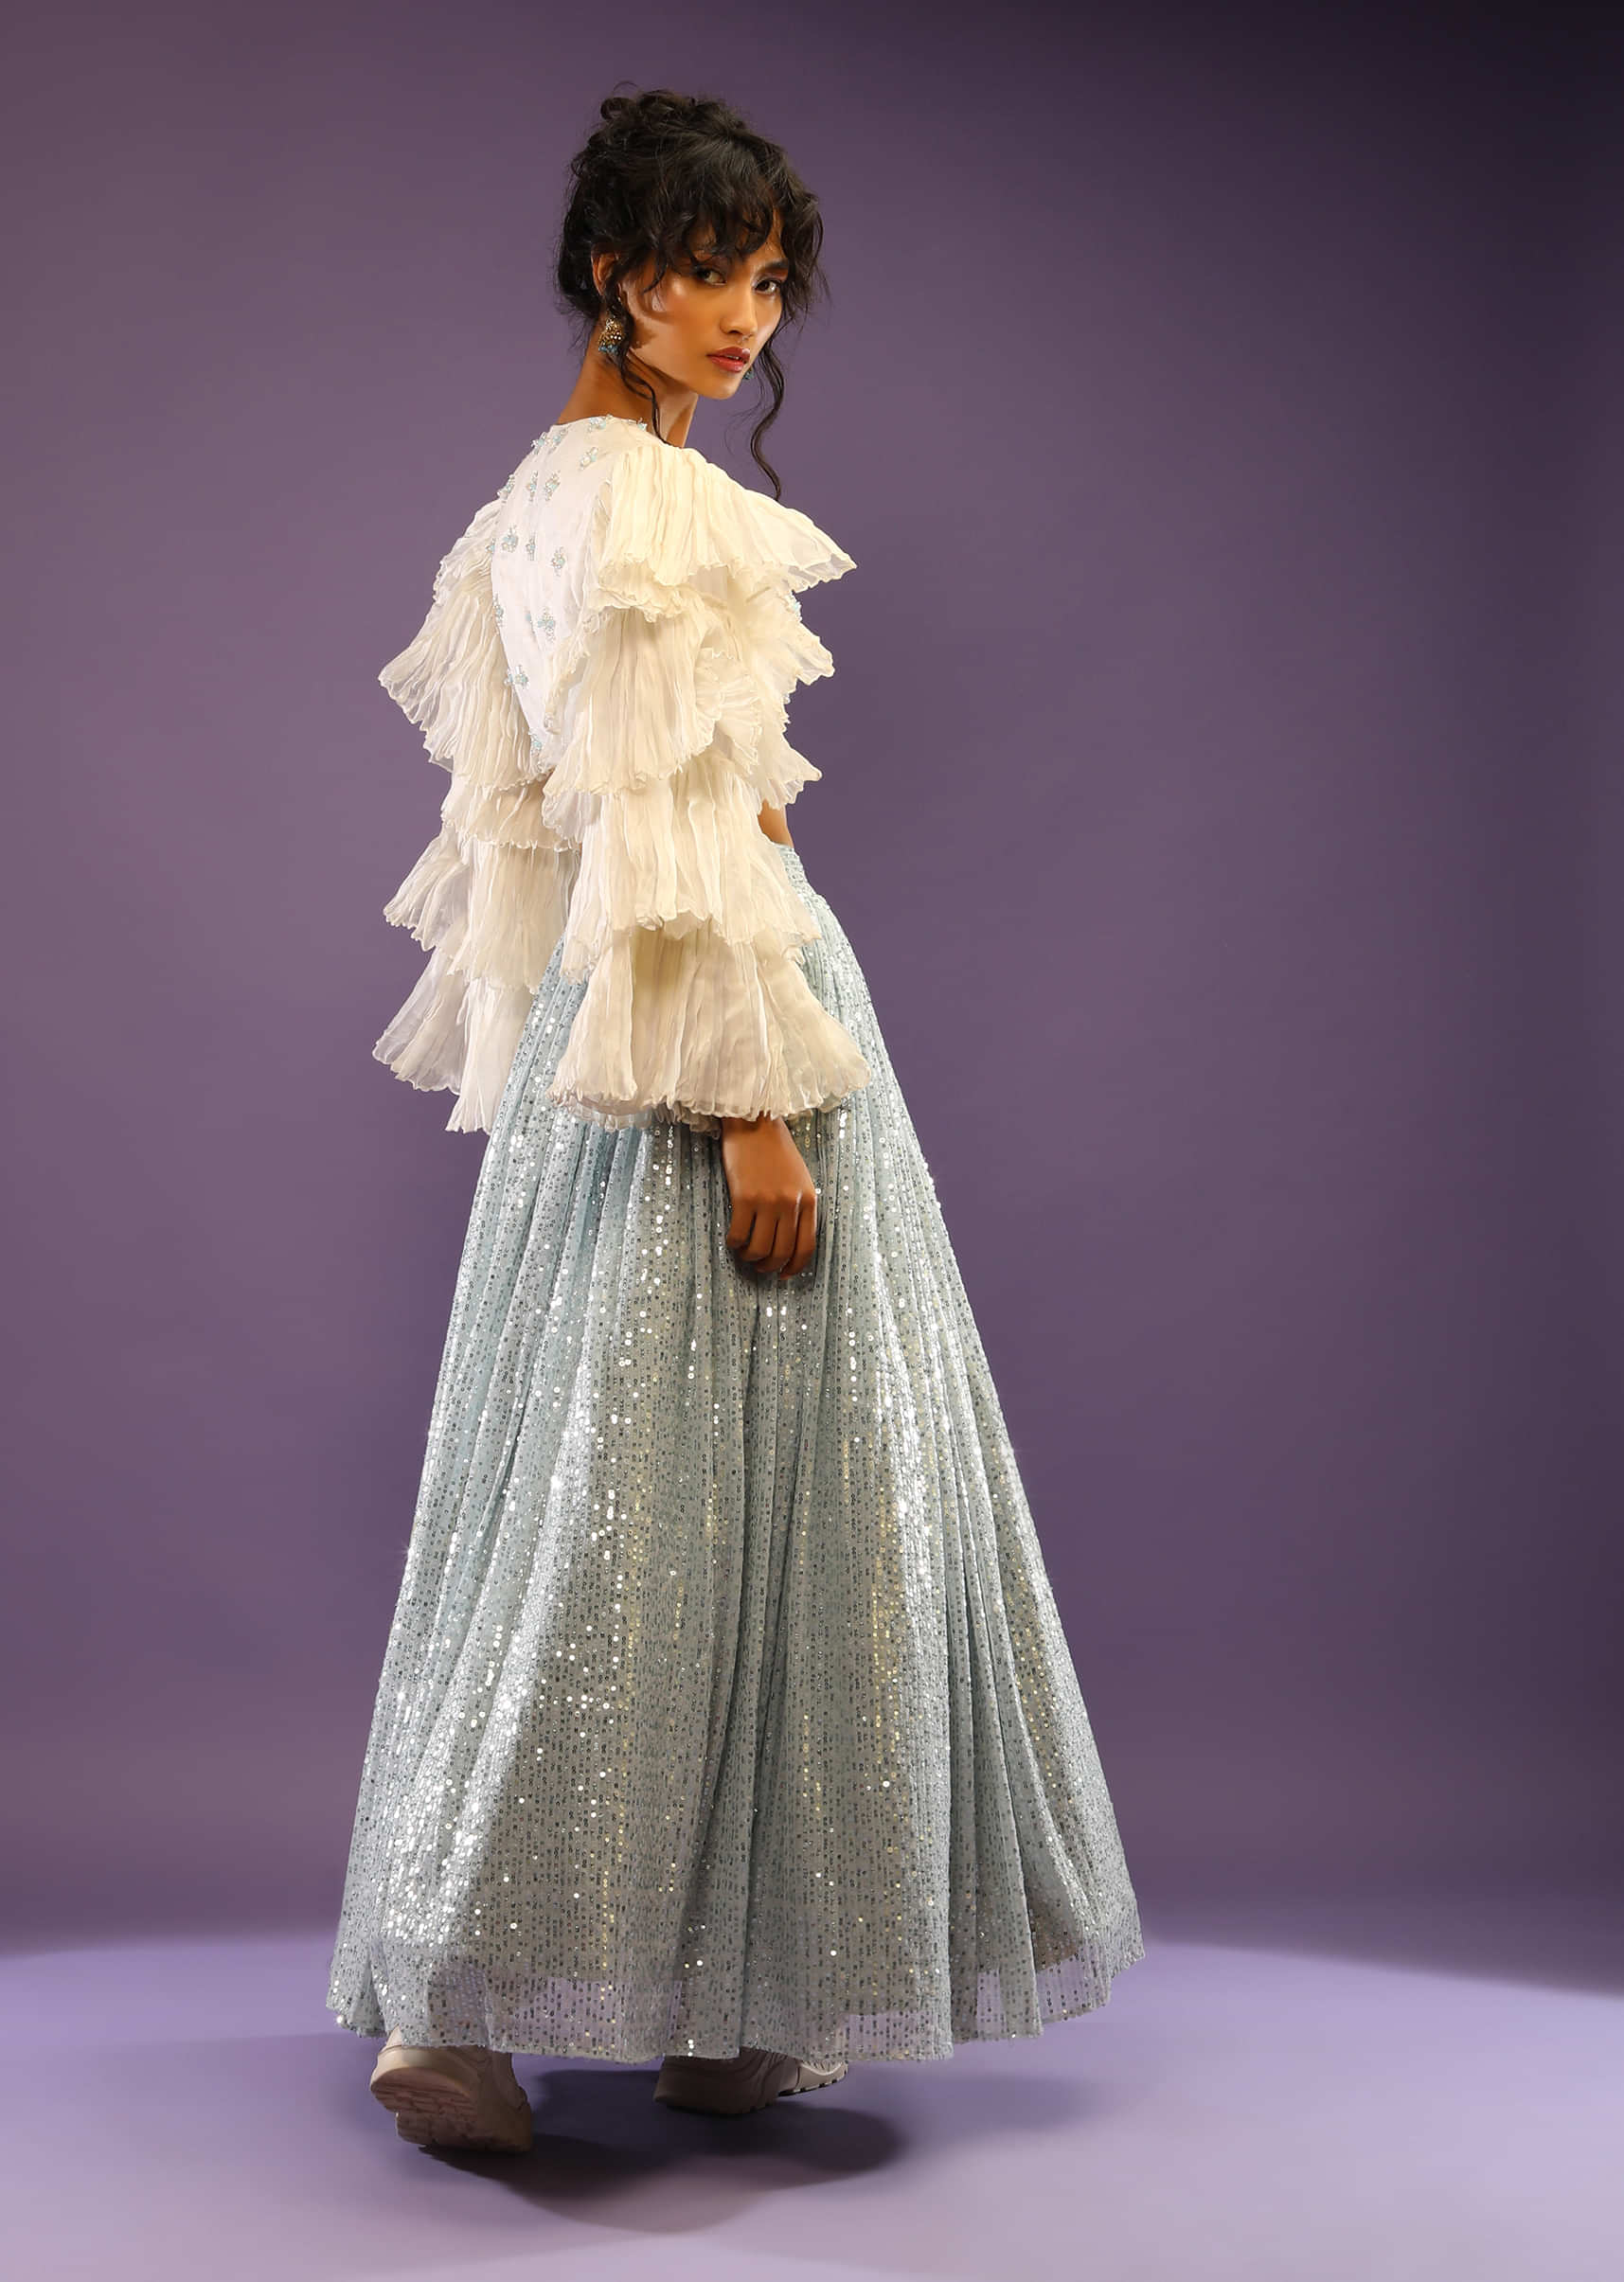 Powder Blue Sequin Skirt And White Crop Top With Fancy Layered Bell Sleeves And Plunging Neckline